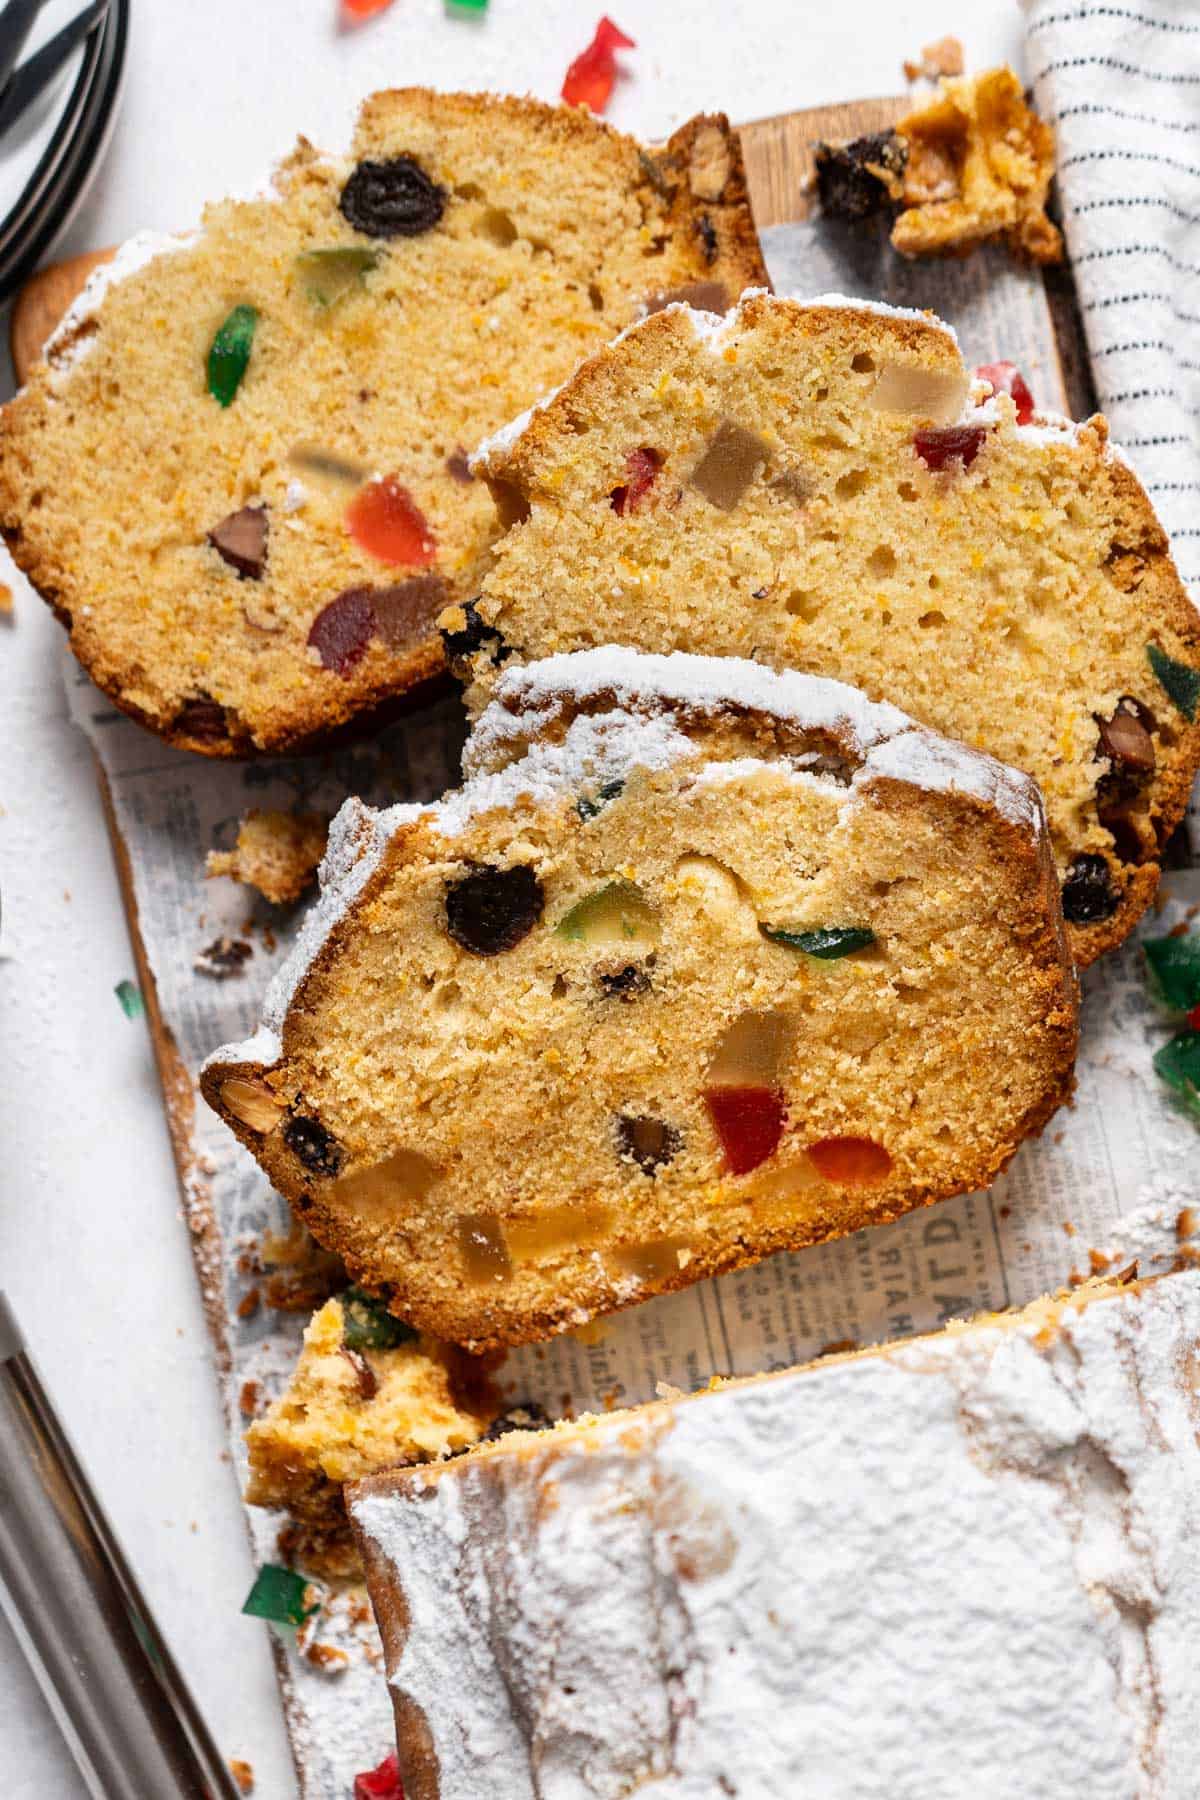 Three slices of fruitcake on a wooden table.